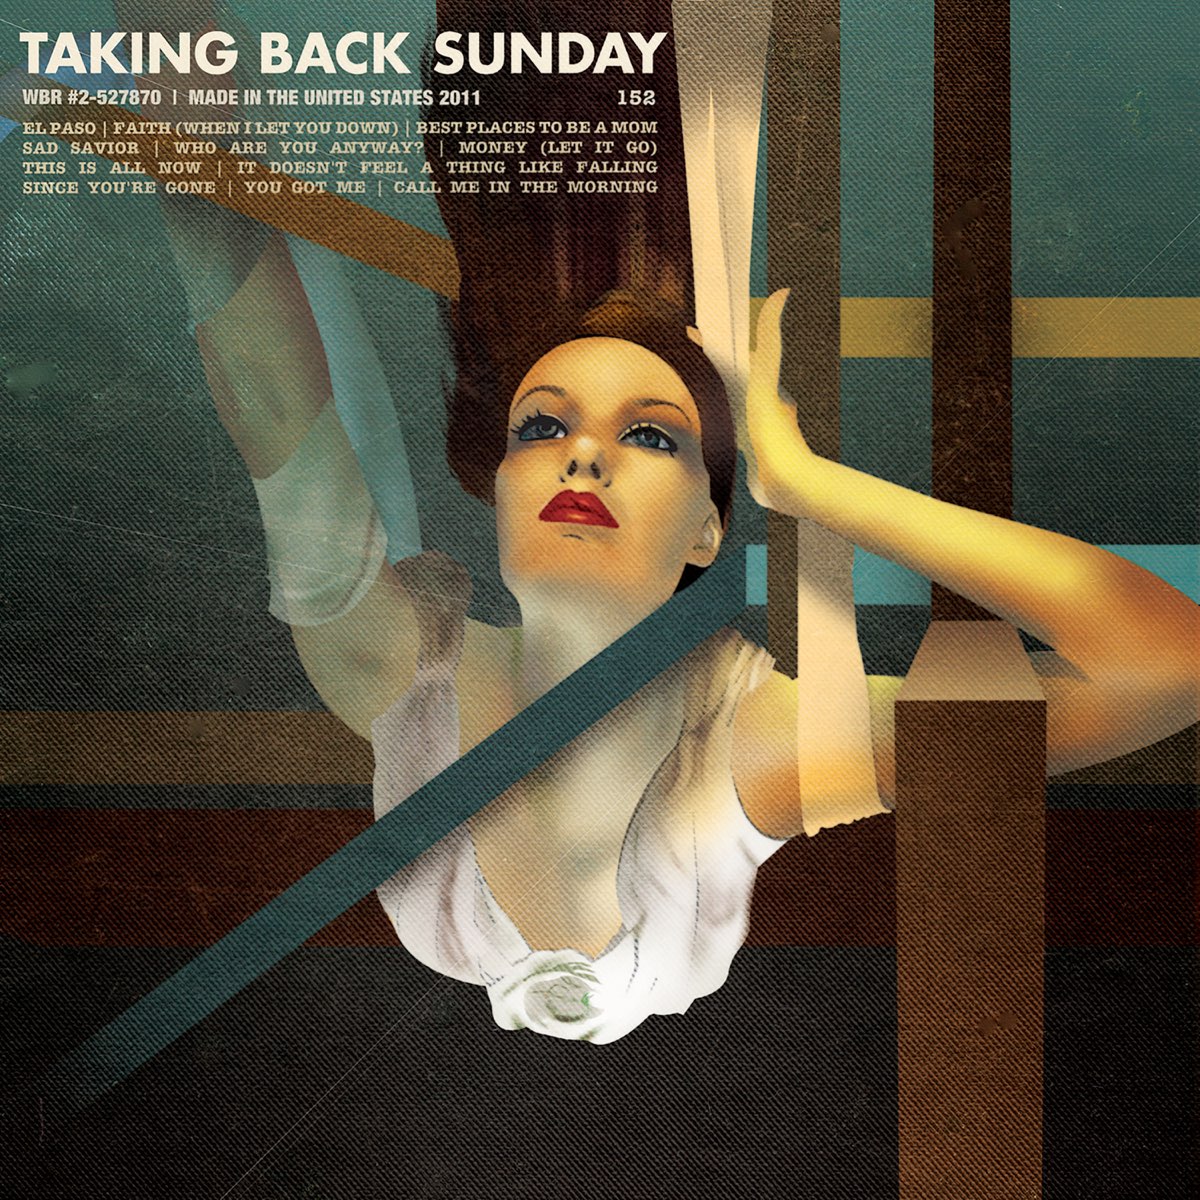 ‎Taking Back Sunday (Deluxe Edition) by Taking Back Sunday on Apple Music